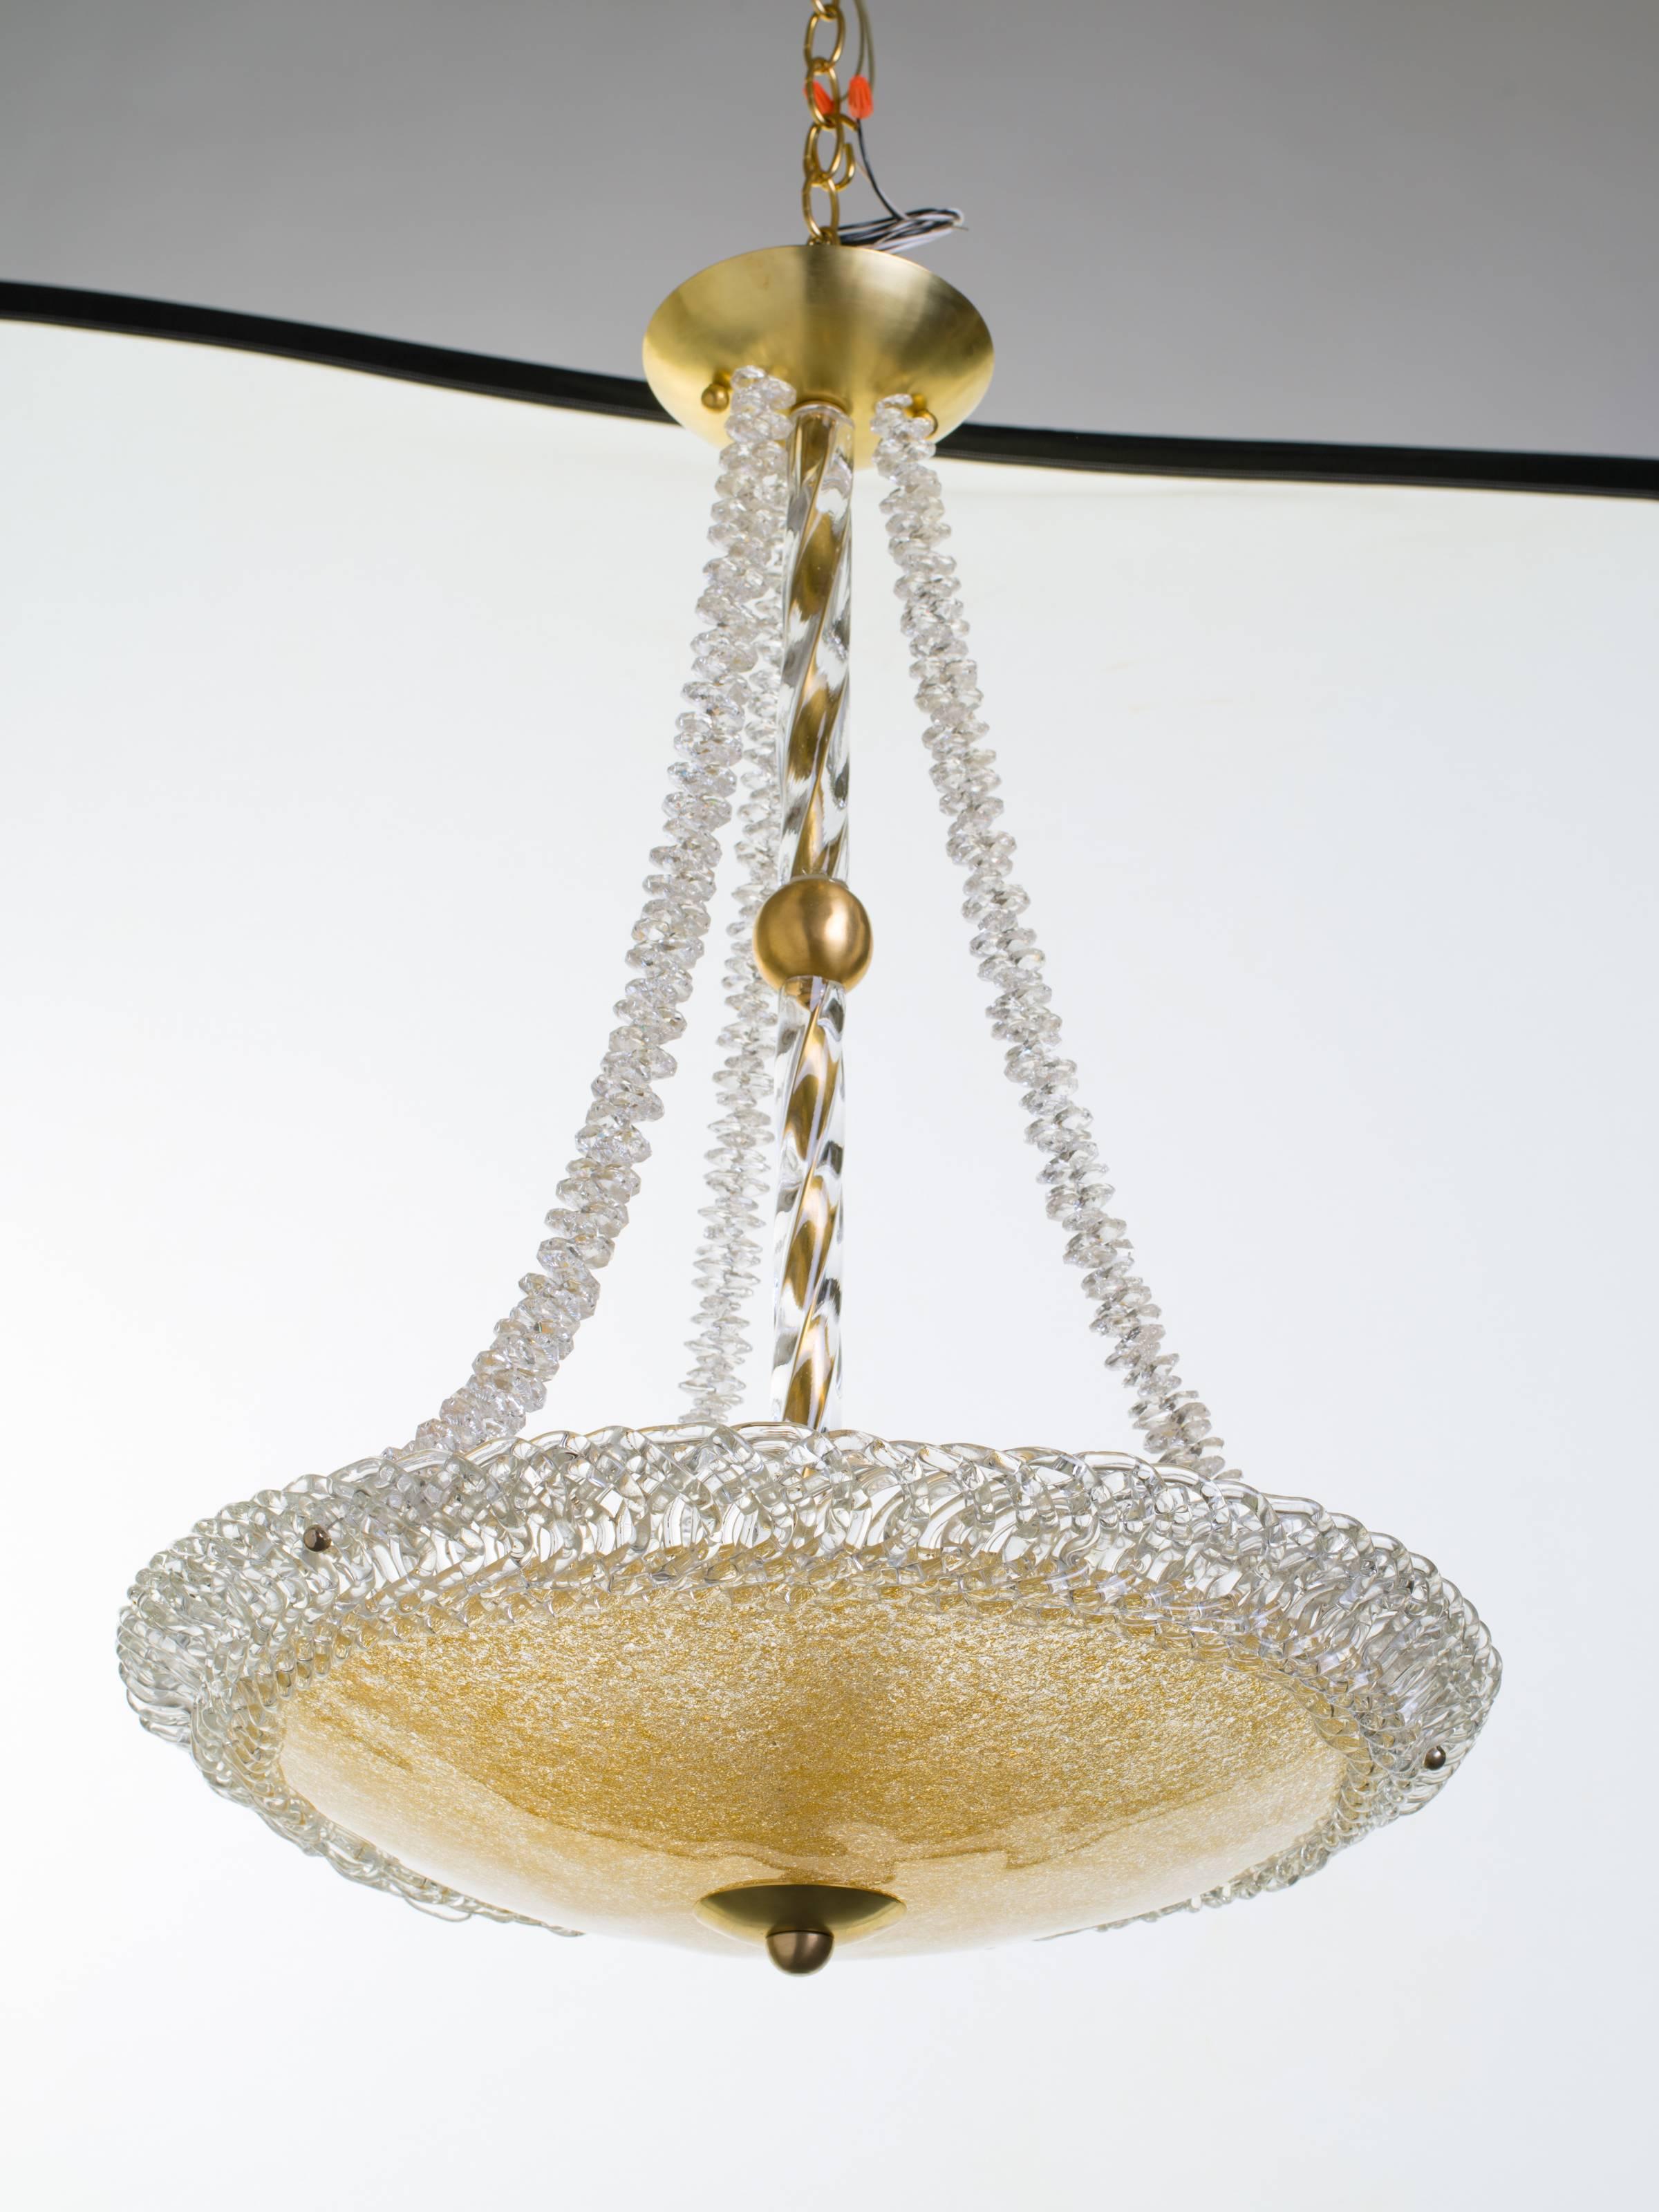 Murano glass chandelier with Swarovski crystal beaded accents.